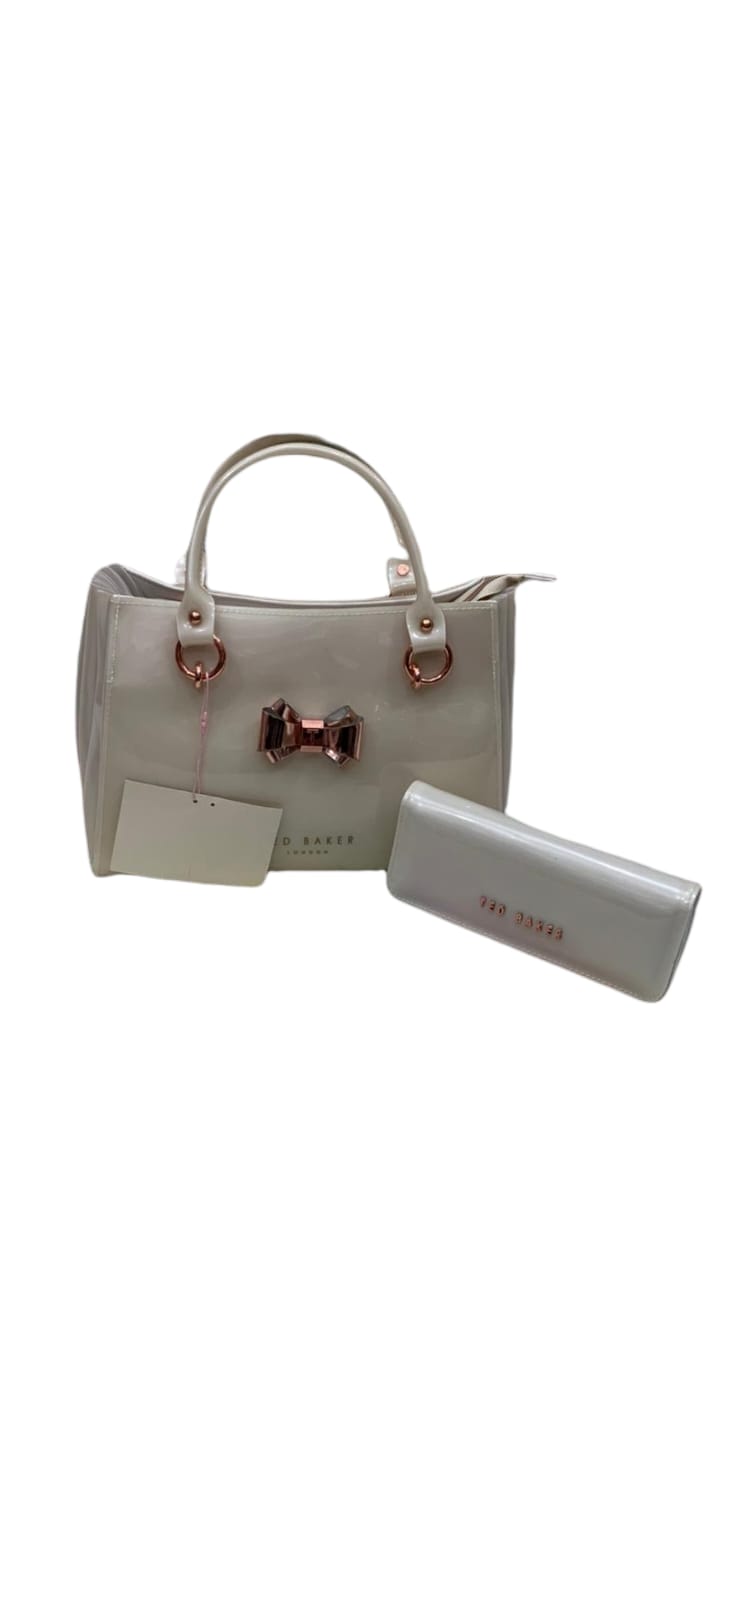 TB Bag - White With Purse - Fragrance Deliver SA